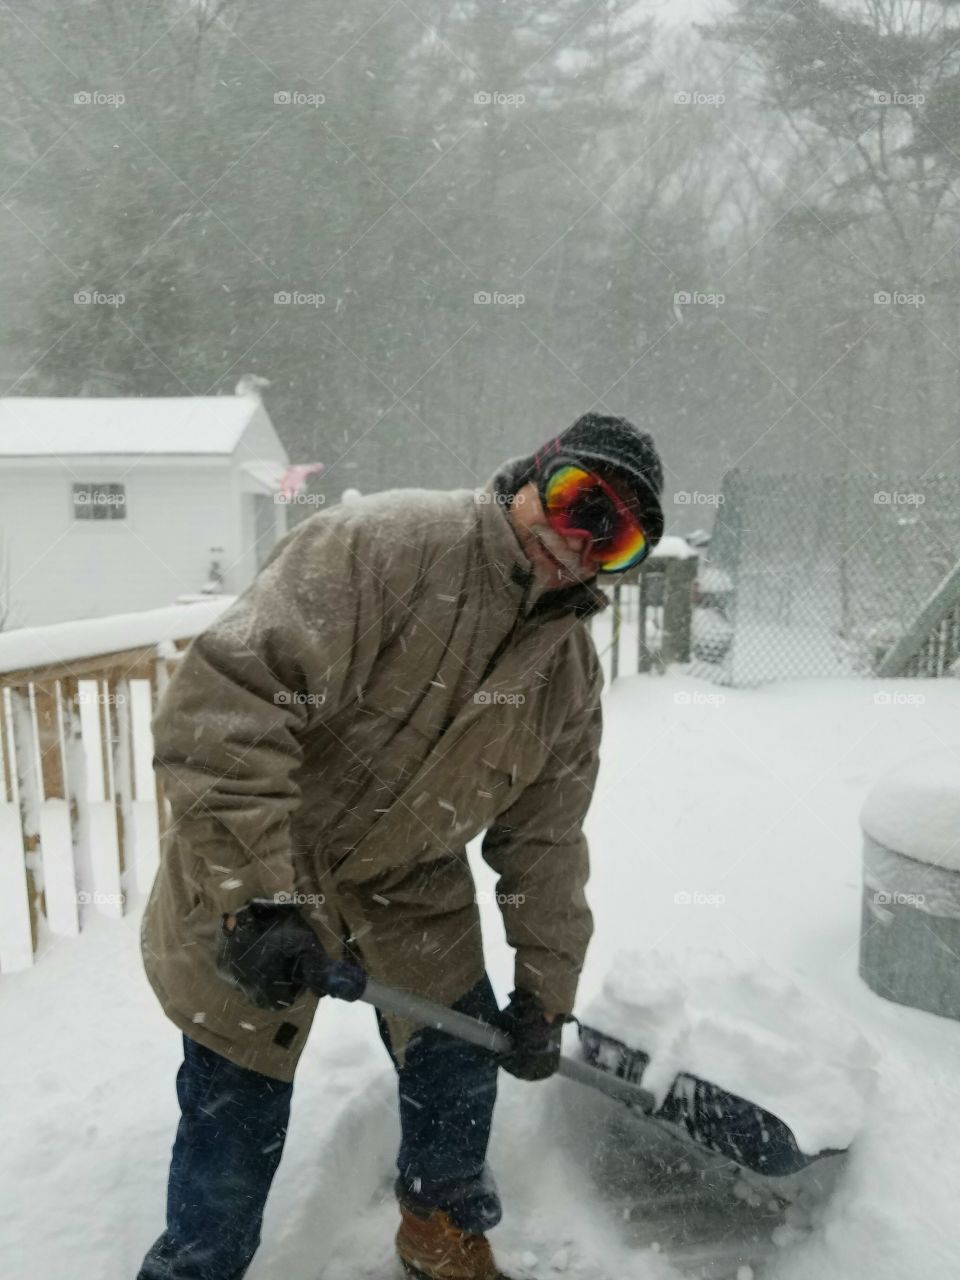 Dressed for snowstorm shoveling, skiing goggles, gloves, hat, shovel & smiling in the storm.